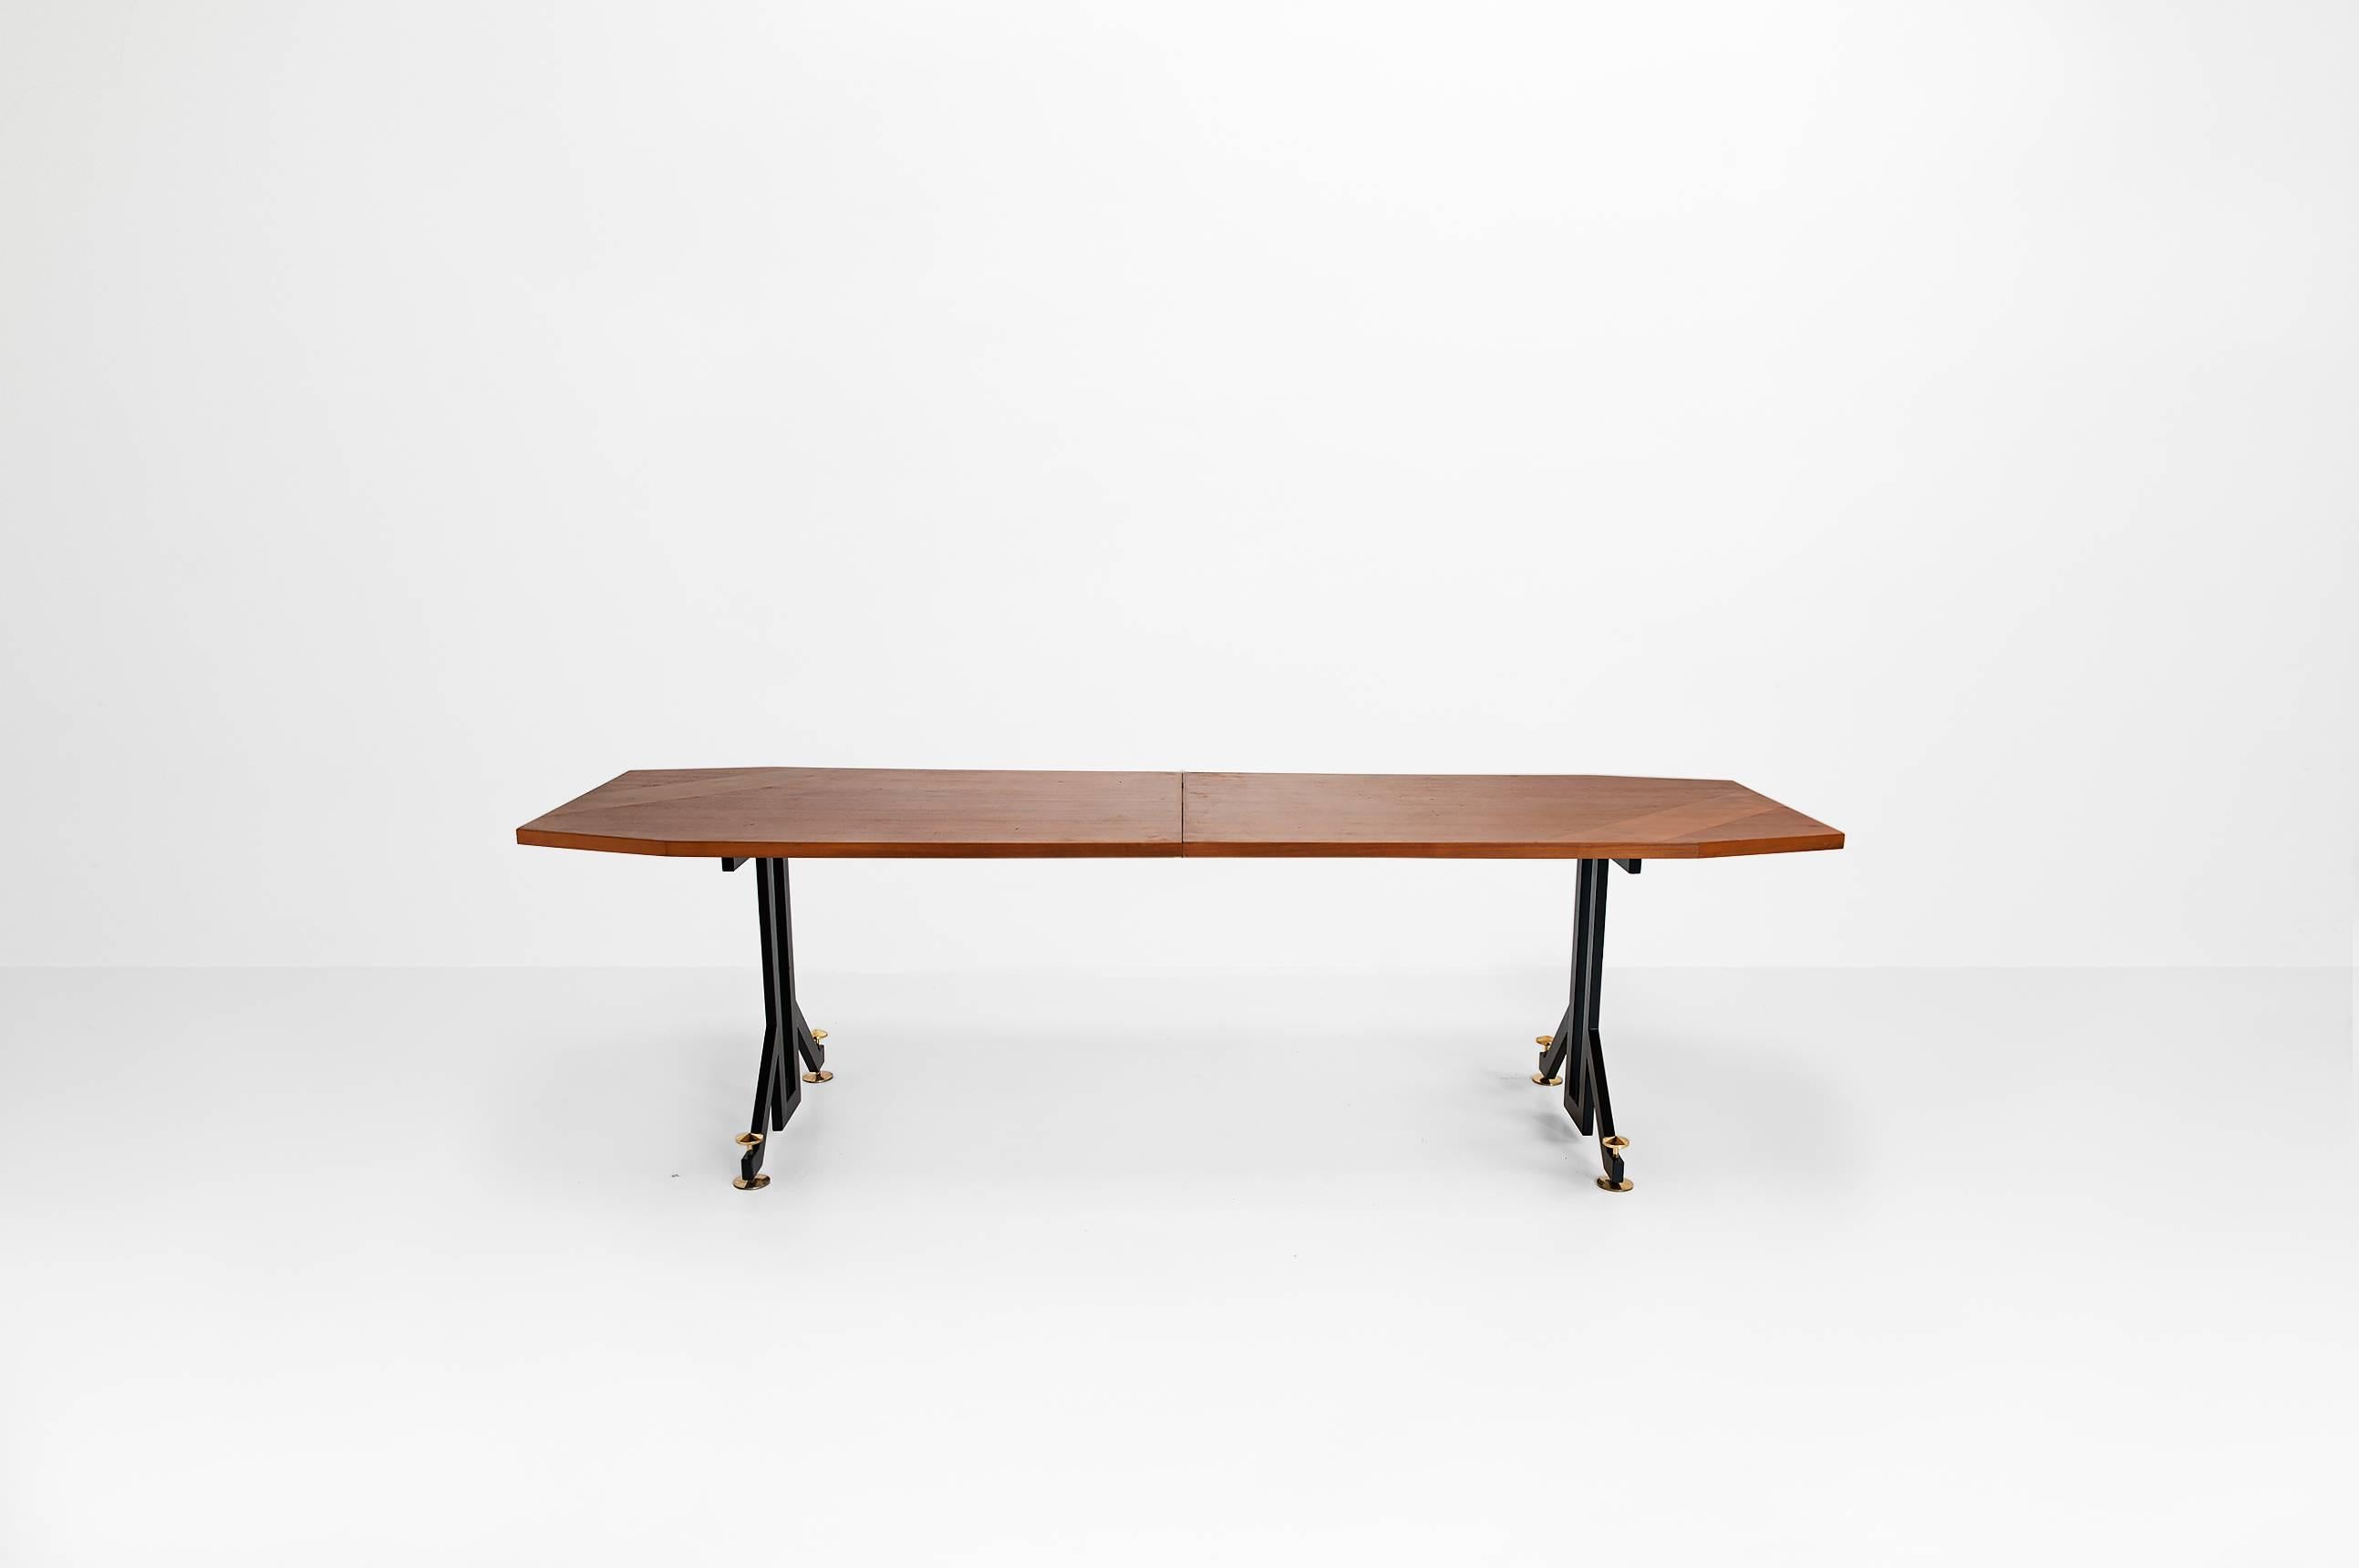 Anonymous

Extendable dining table
Manufactured by Florit
Italy, 1950
Palissandro wood, metal legs and brass details

Measurements
281 cm x 85 cm x 81 H cm (331 cm extendable)
110.6 in x 33.4 in x 31.8 H in (130.3 in